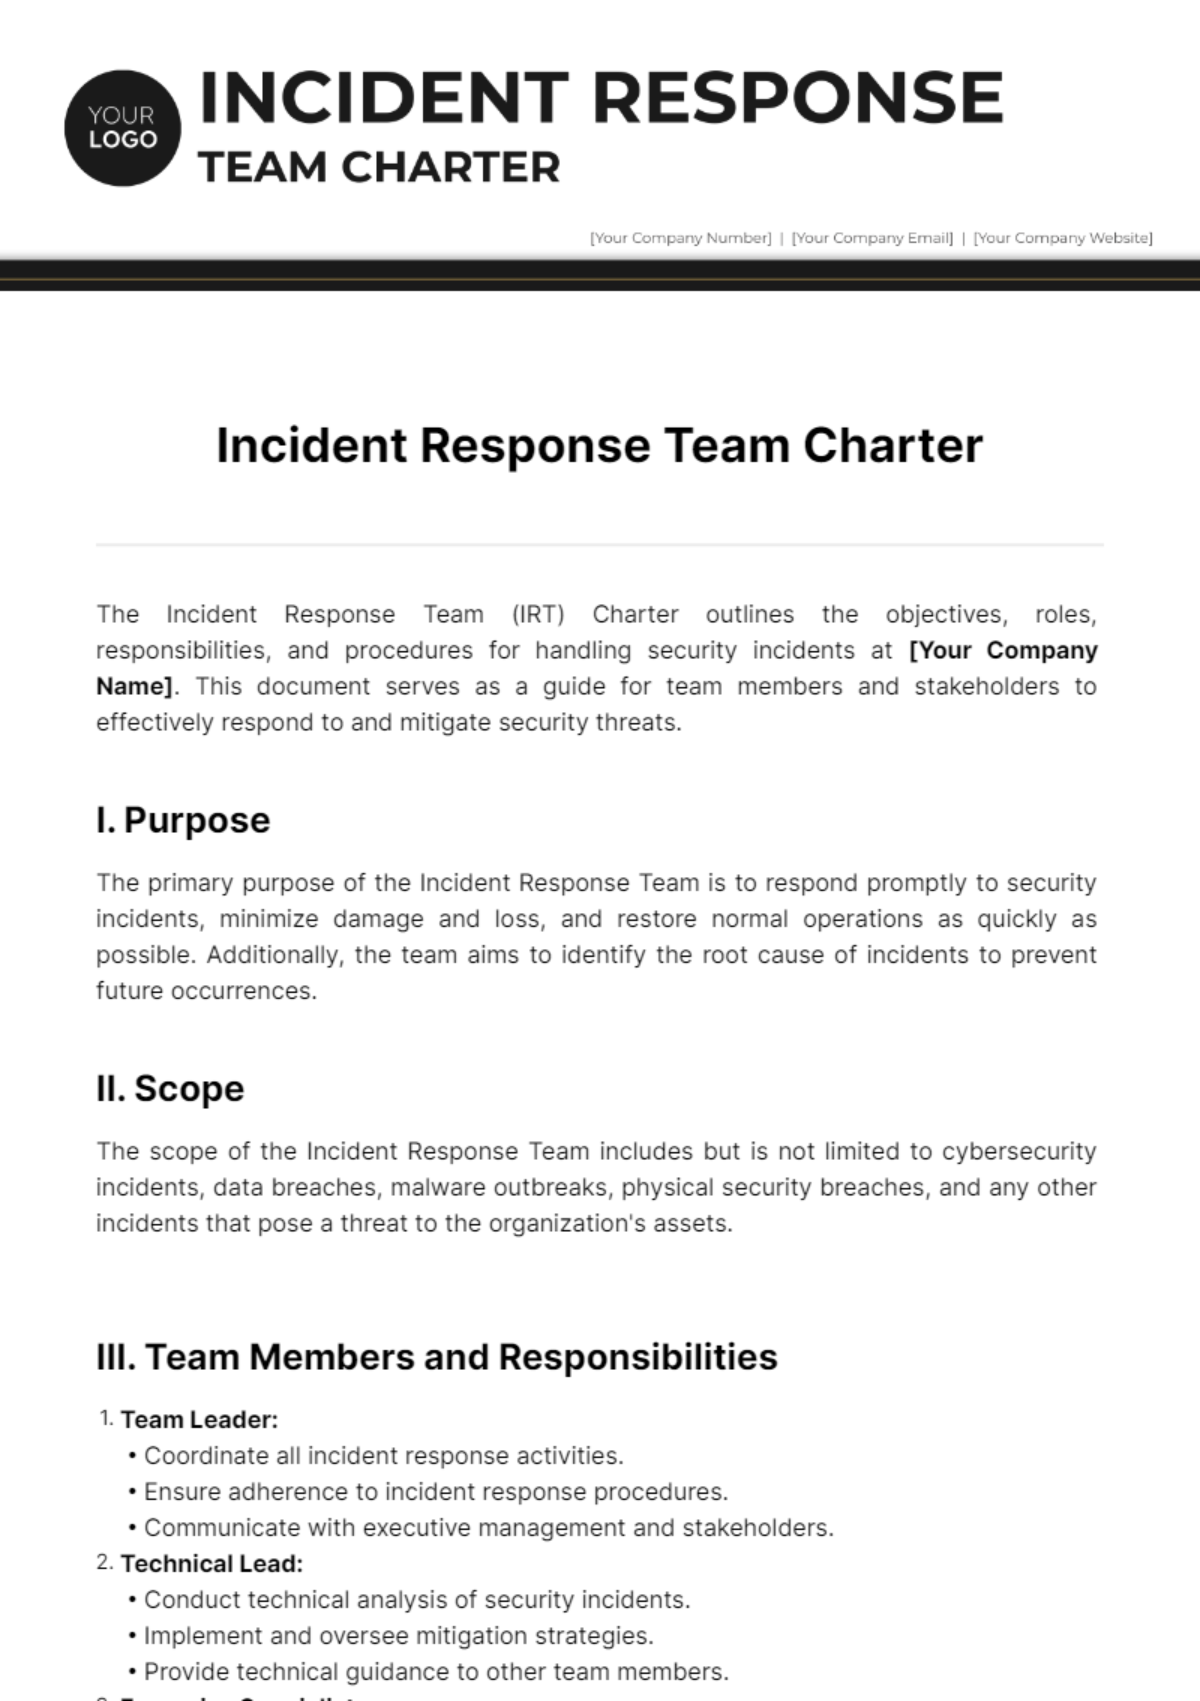 Free Incident Response Team Charter Template